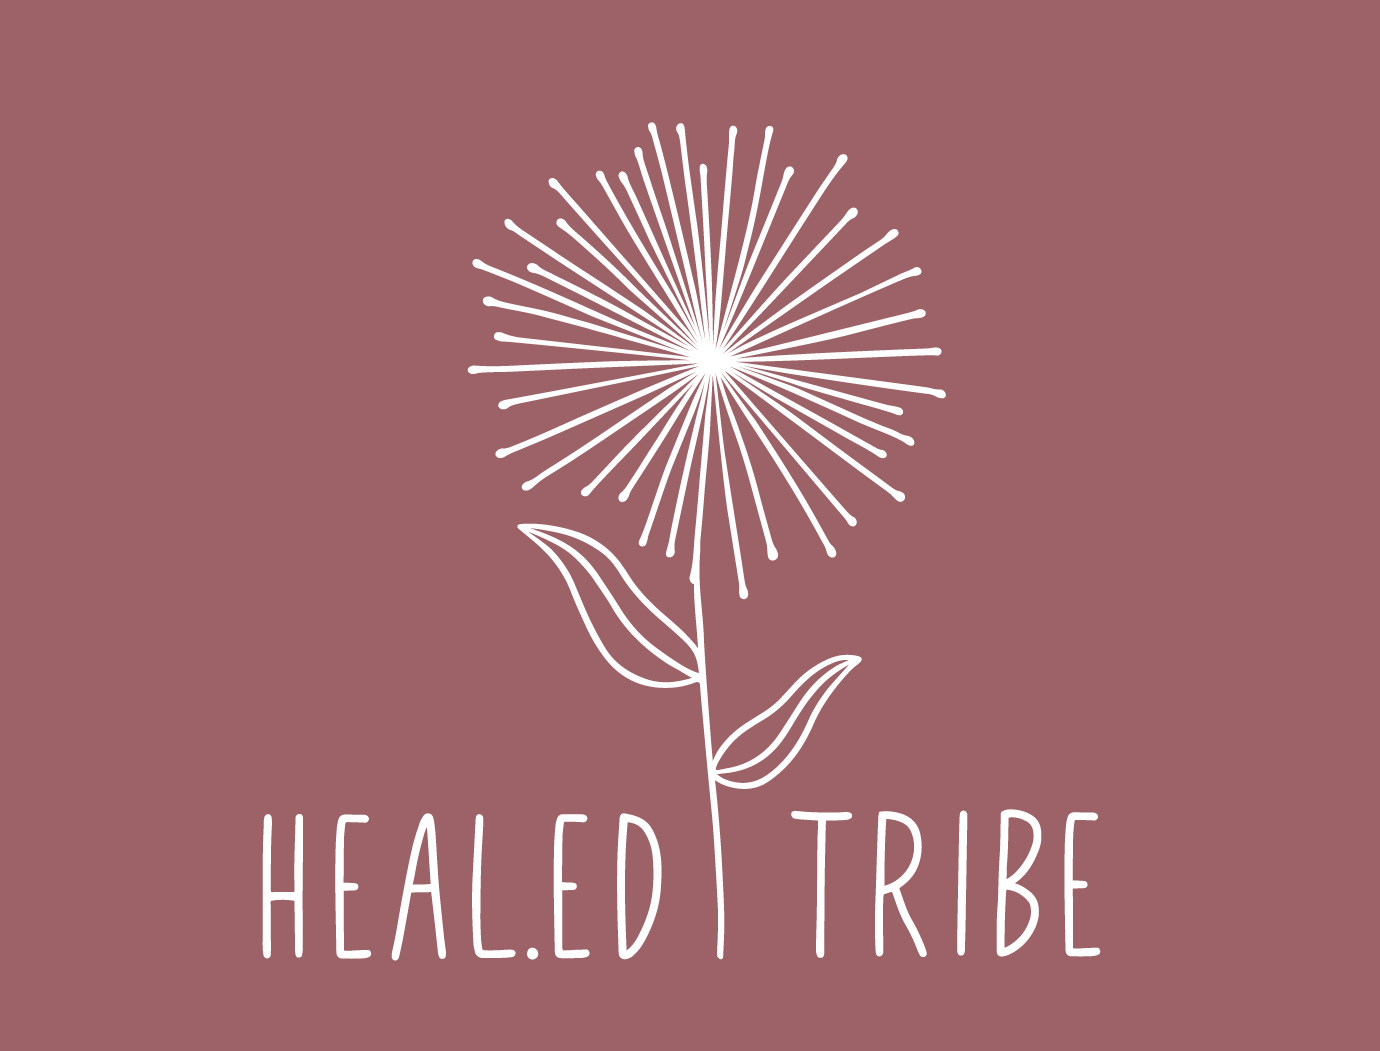 About Us - heal.ed tribe